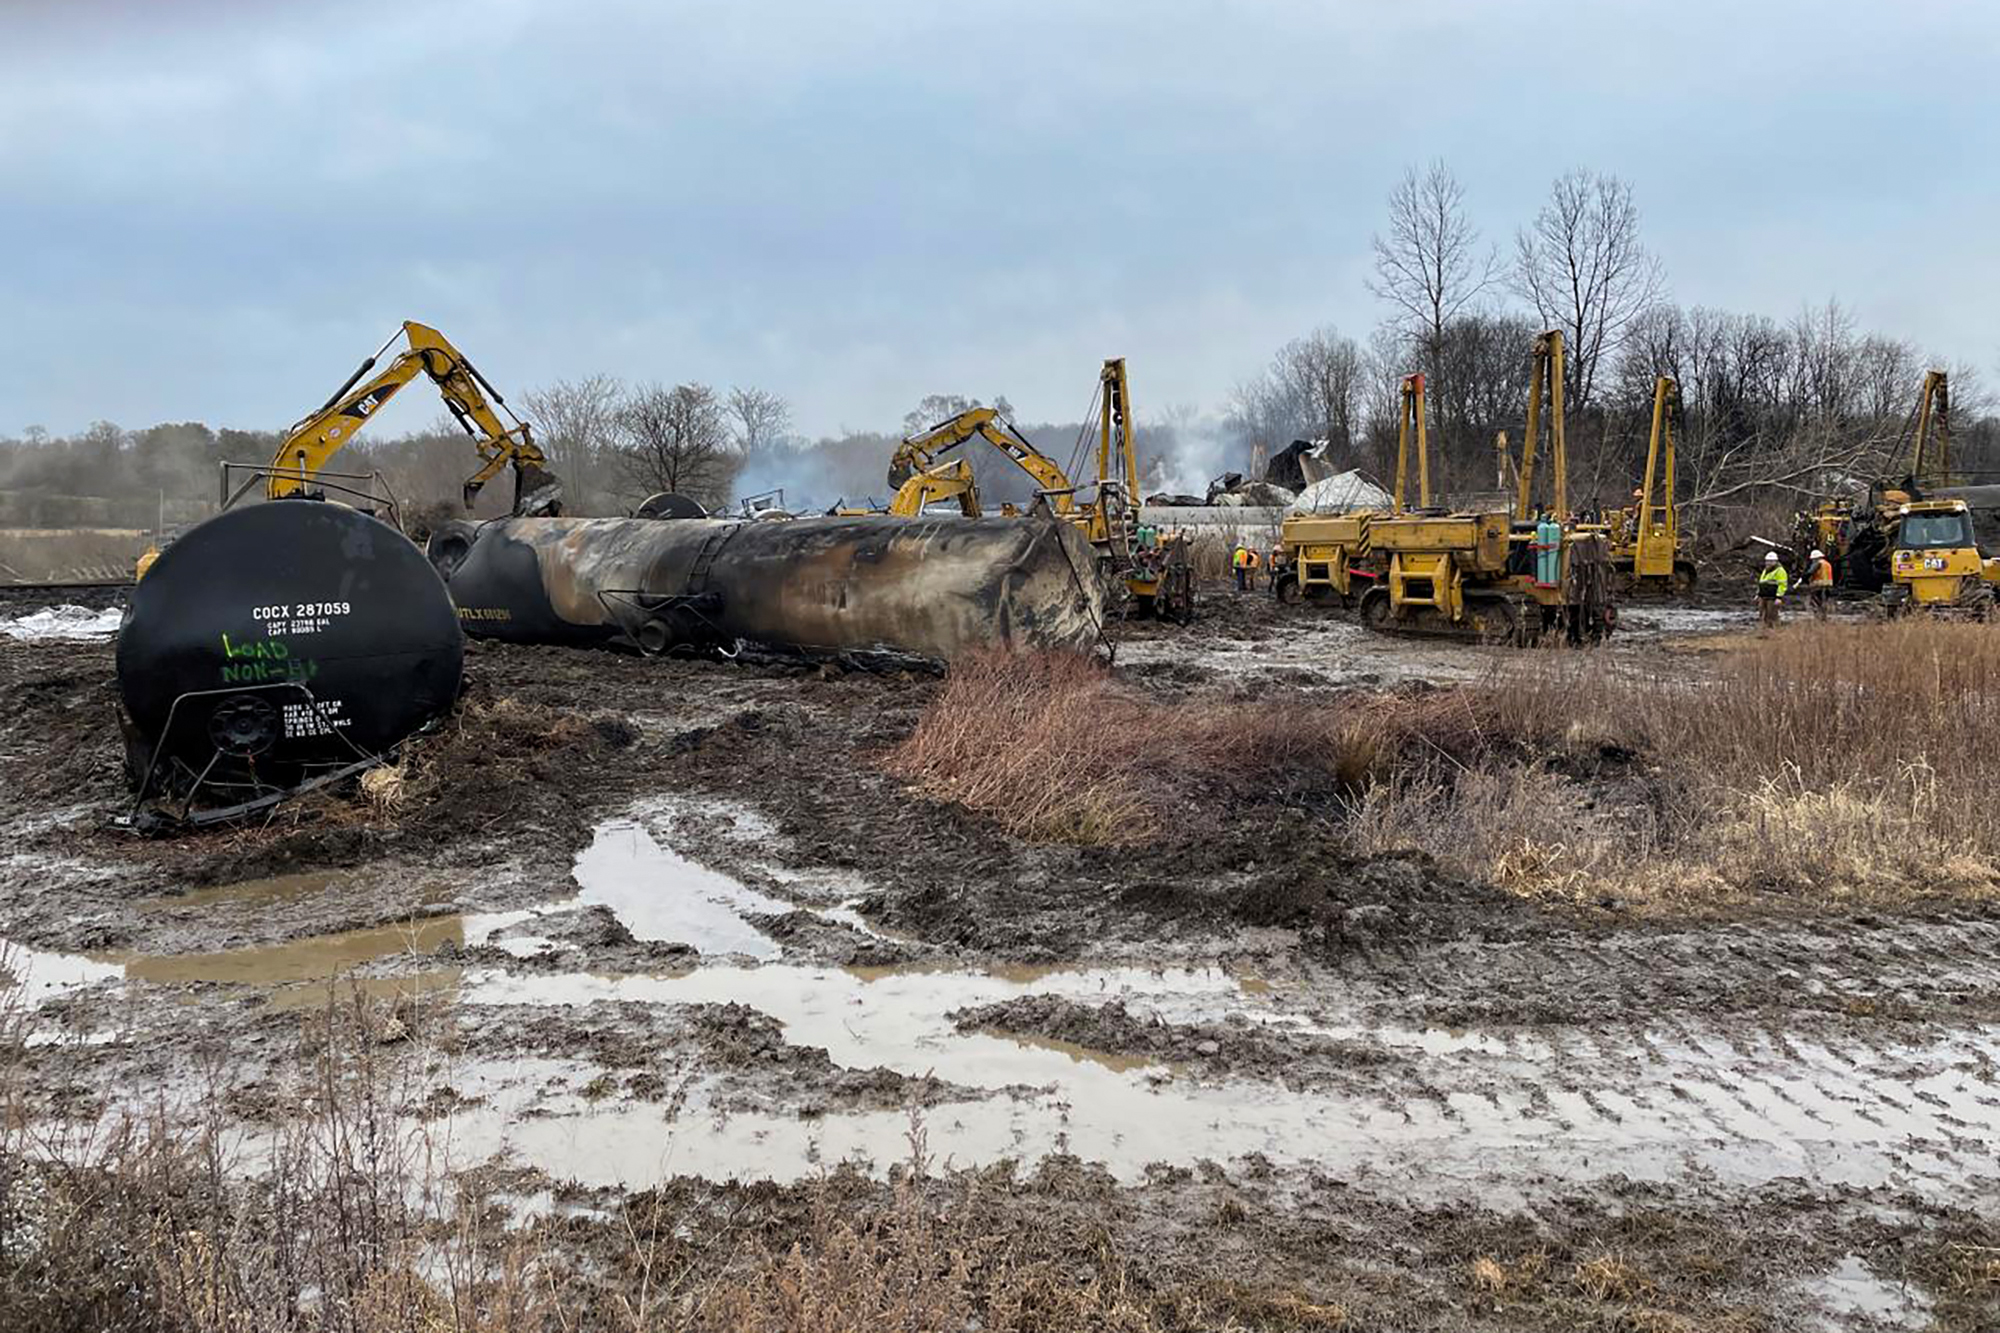 The Train Derailment in Ohio Was a Disaster Waiting to Happen